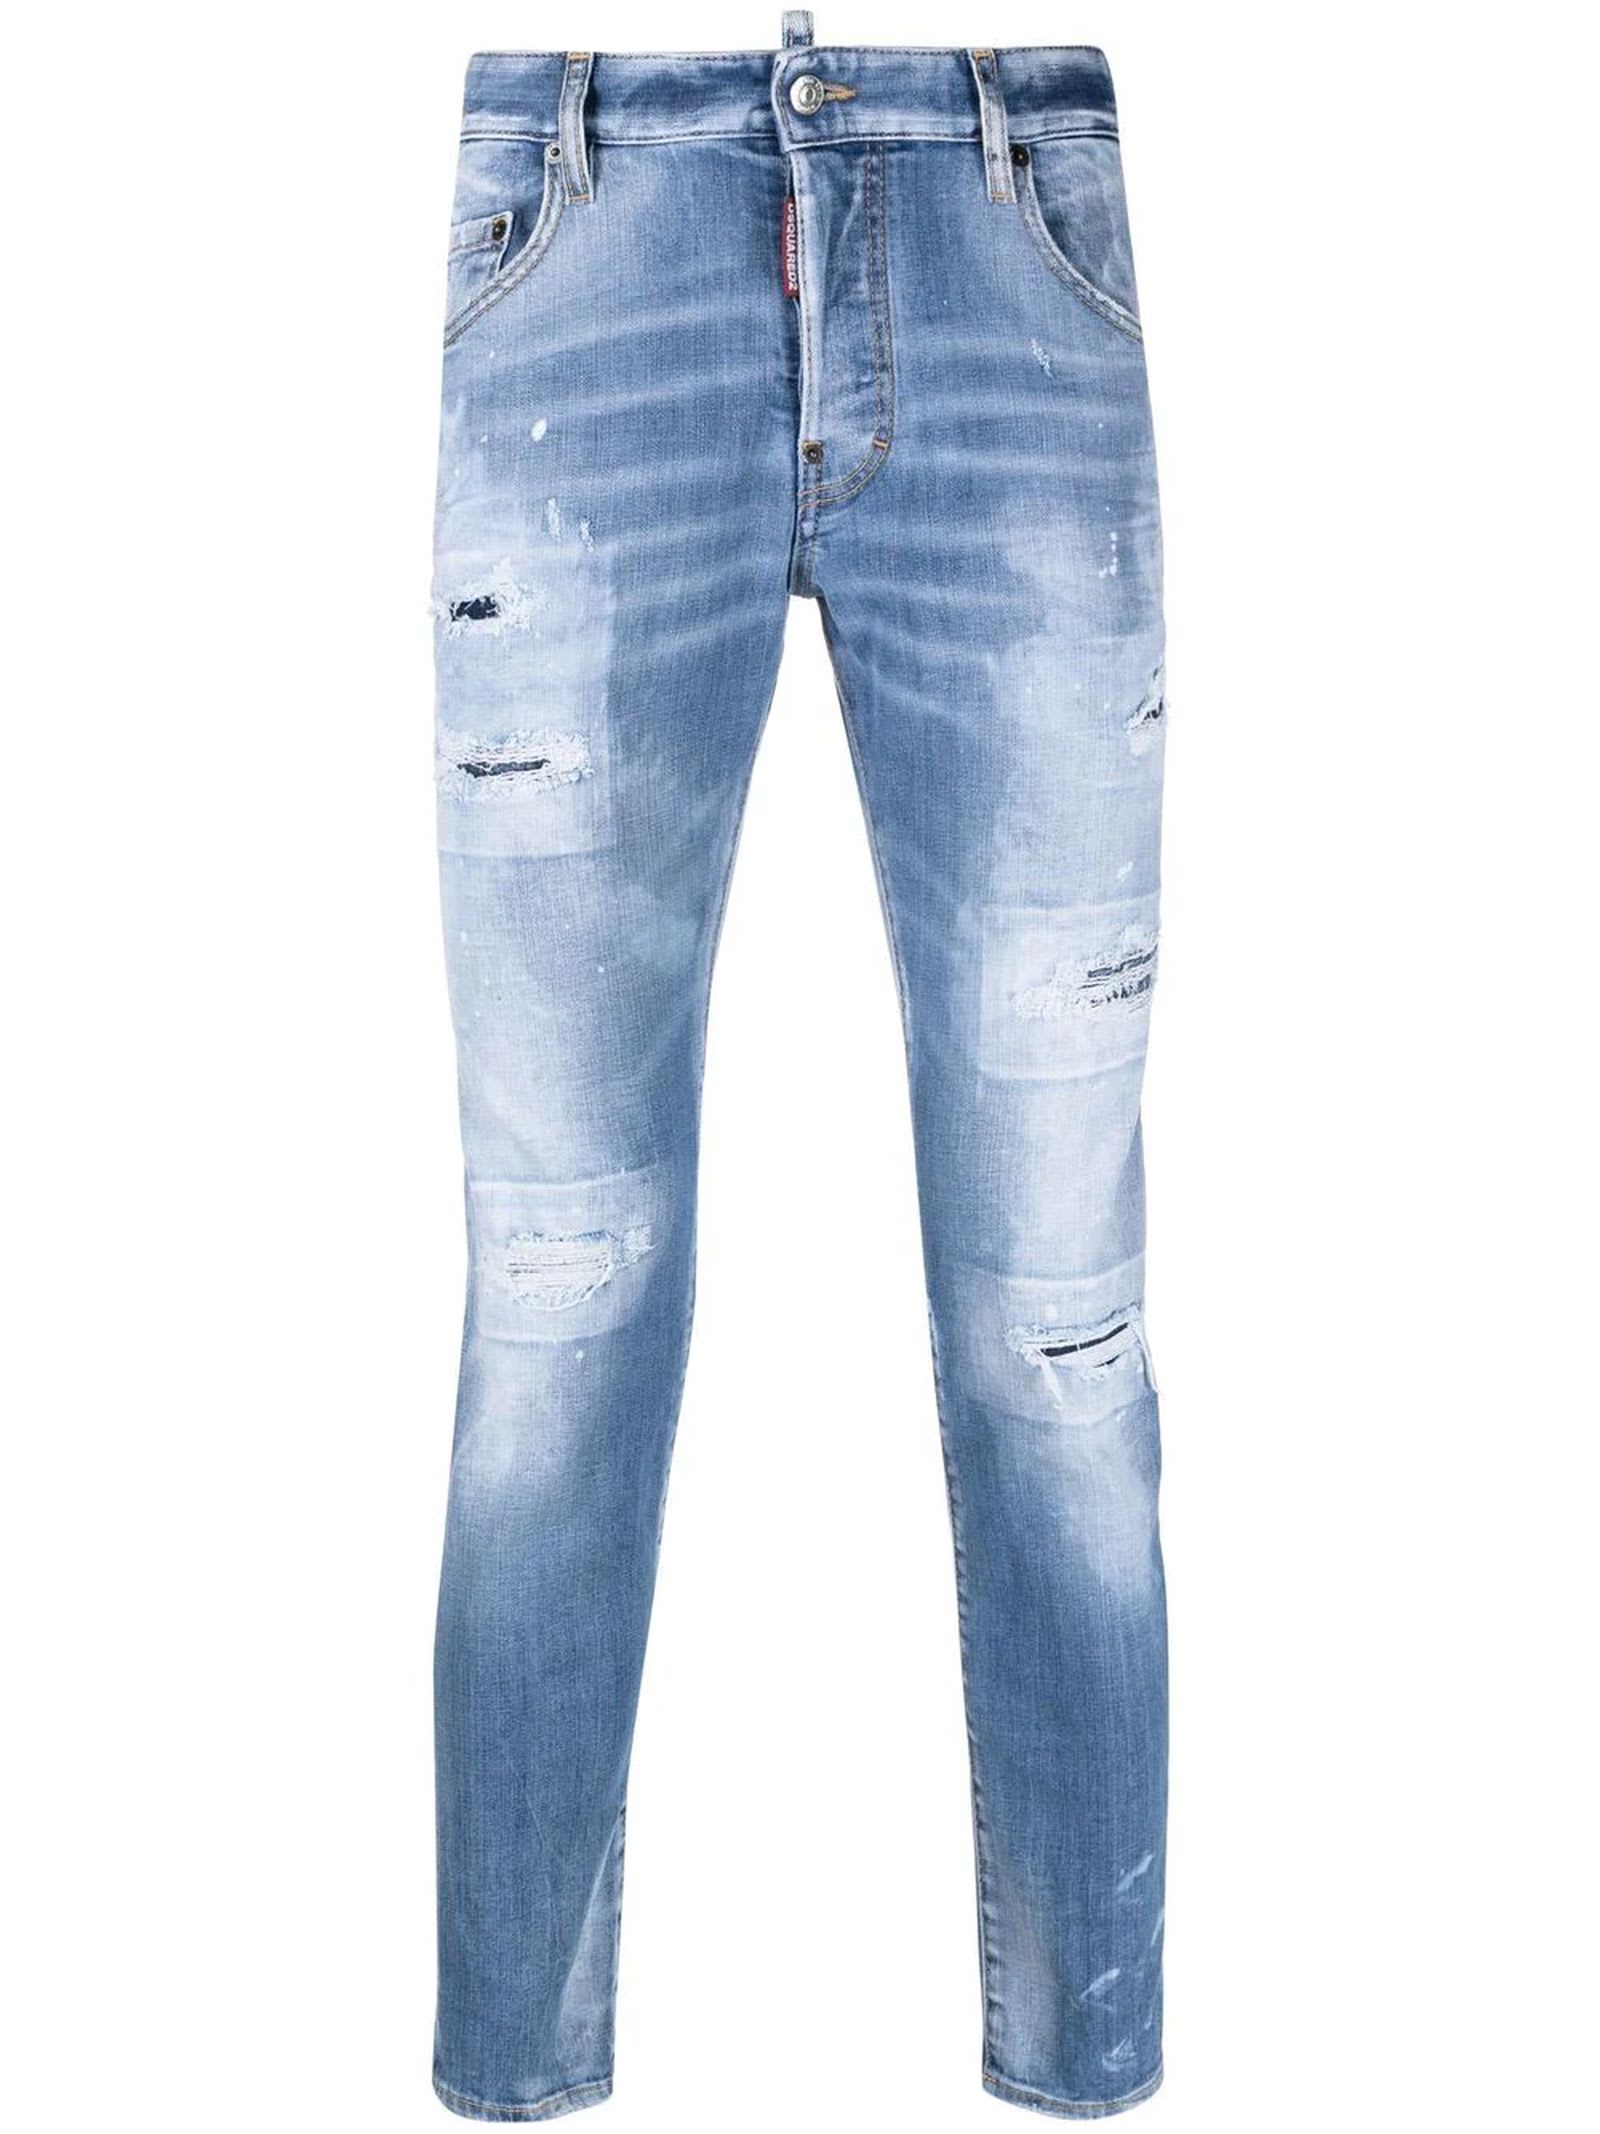 Dsquared2 Light Blue And White Cotton-blend Jeans